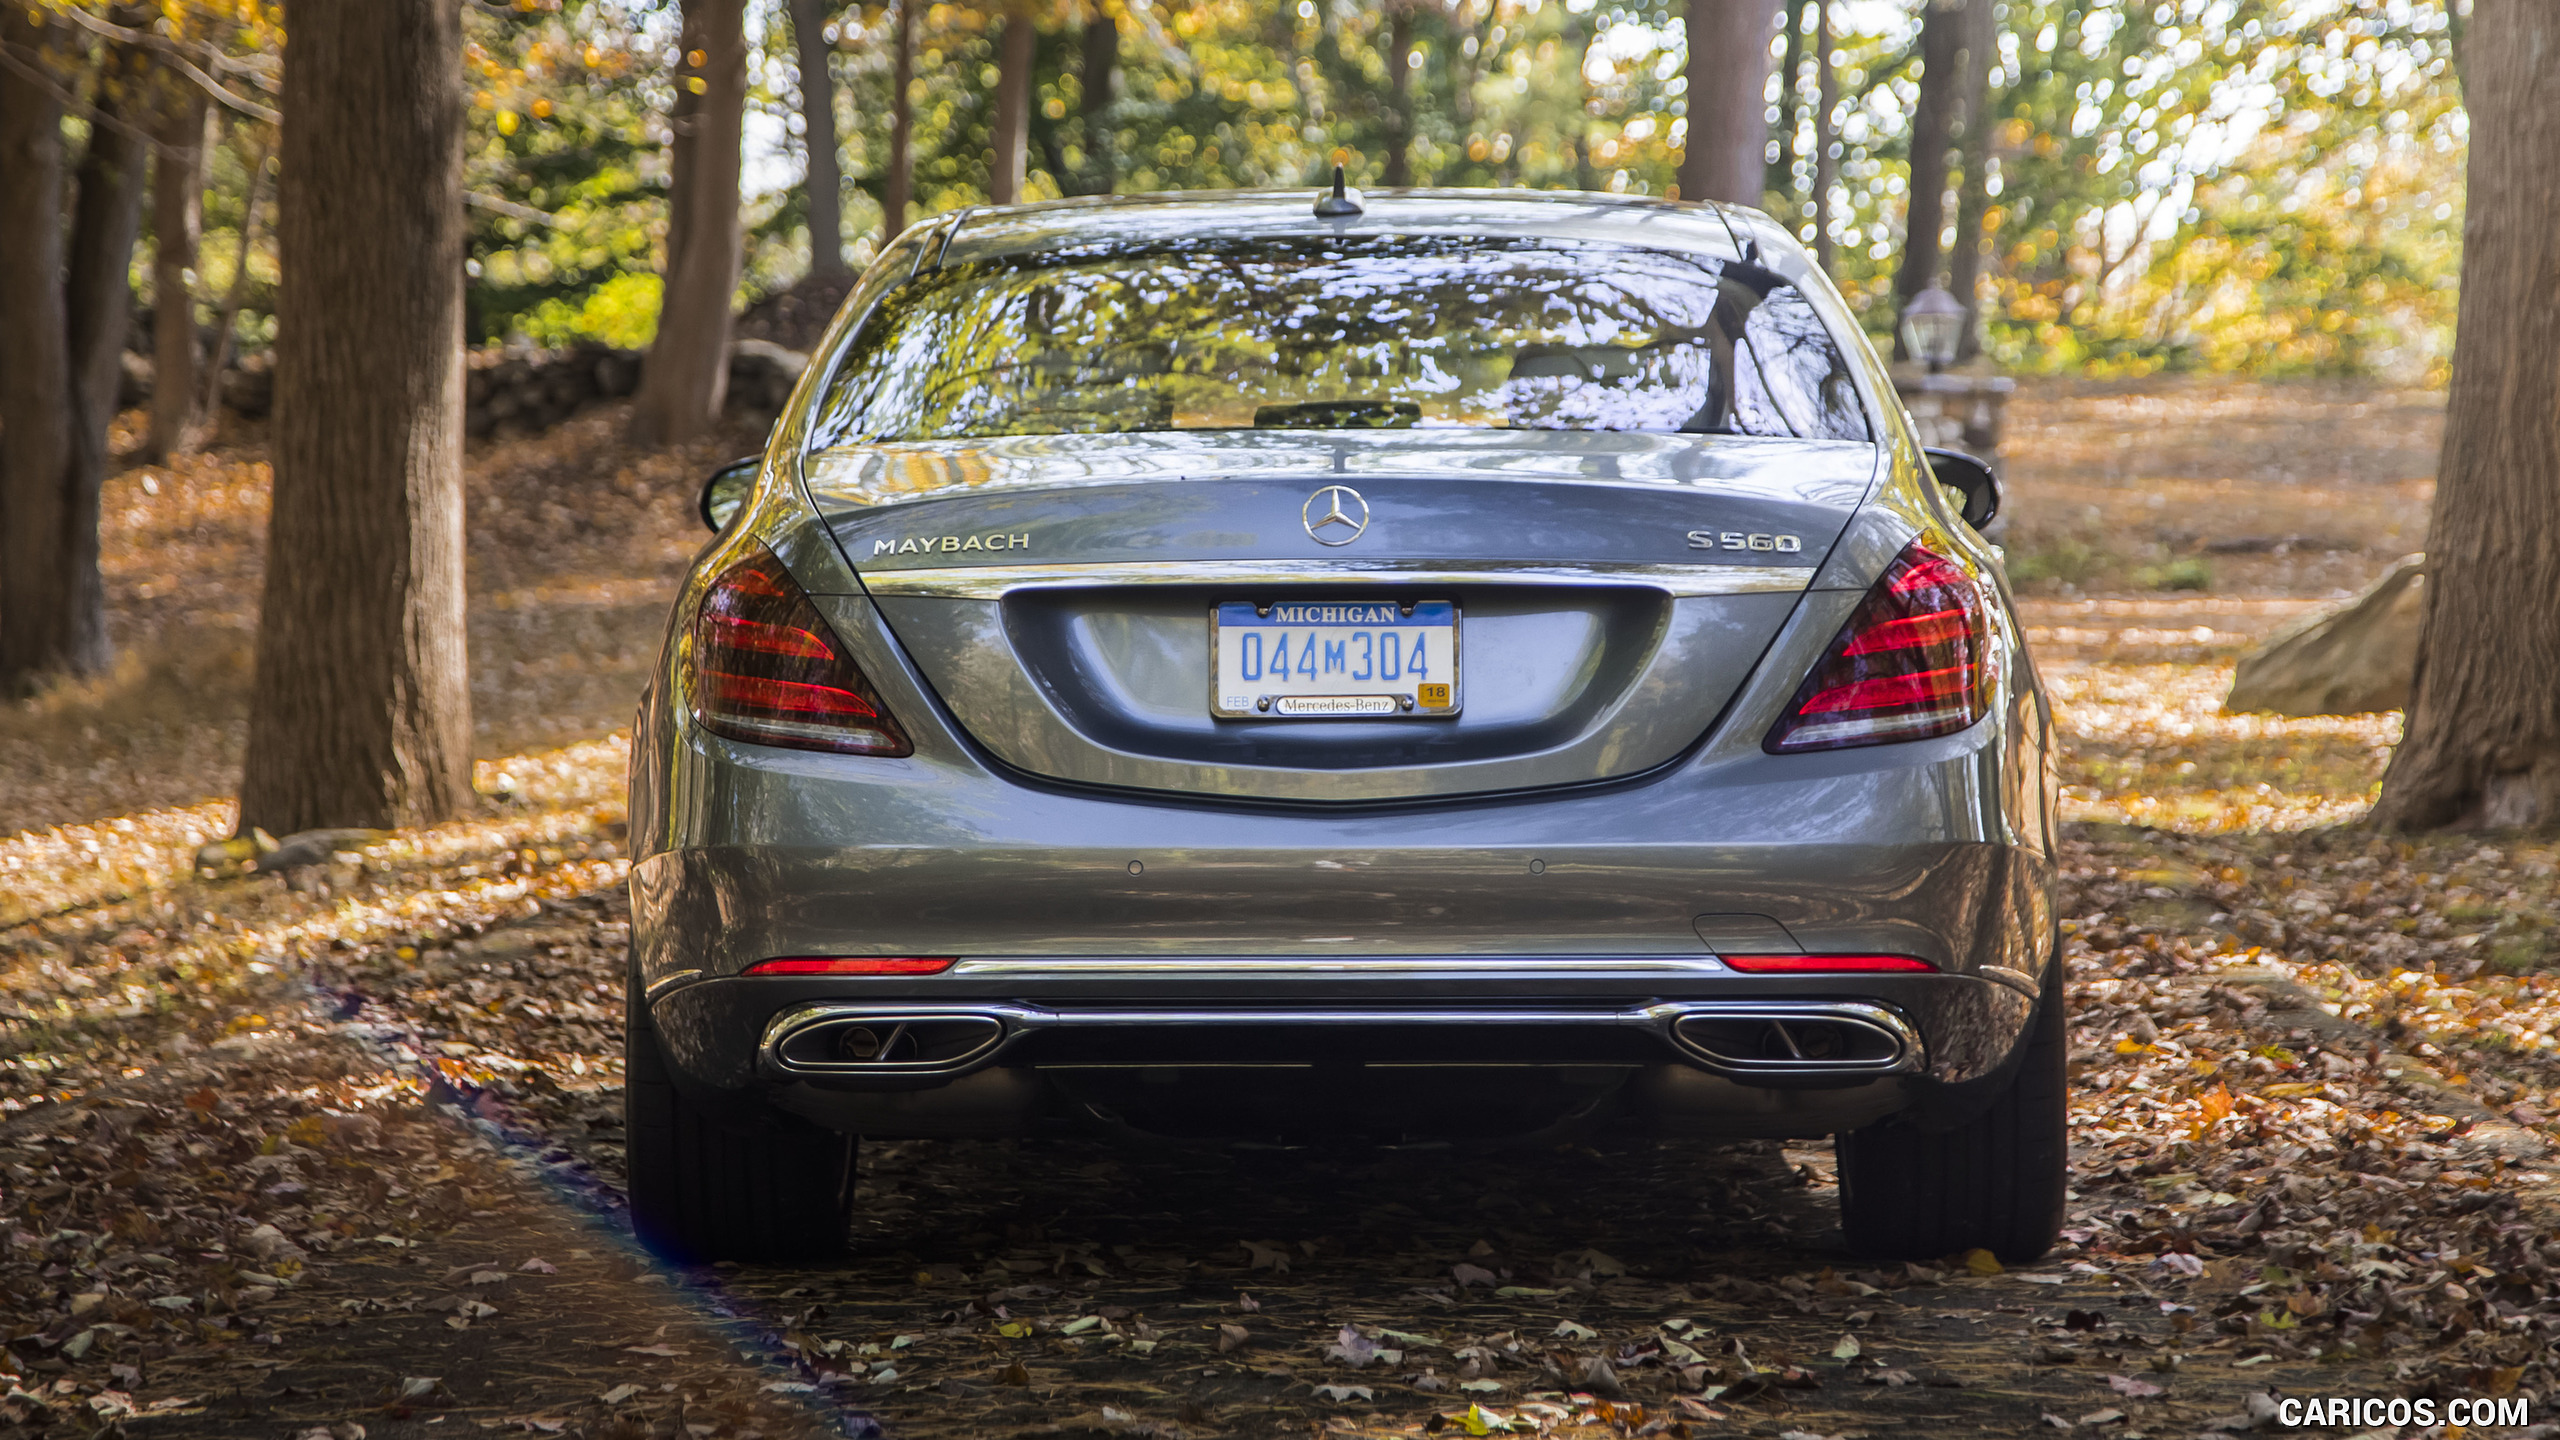 2018 Mercedes-Maybach S-Class S560 4MATIC - Rear, #42 of 63